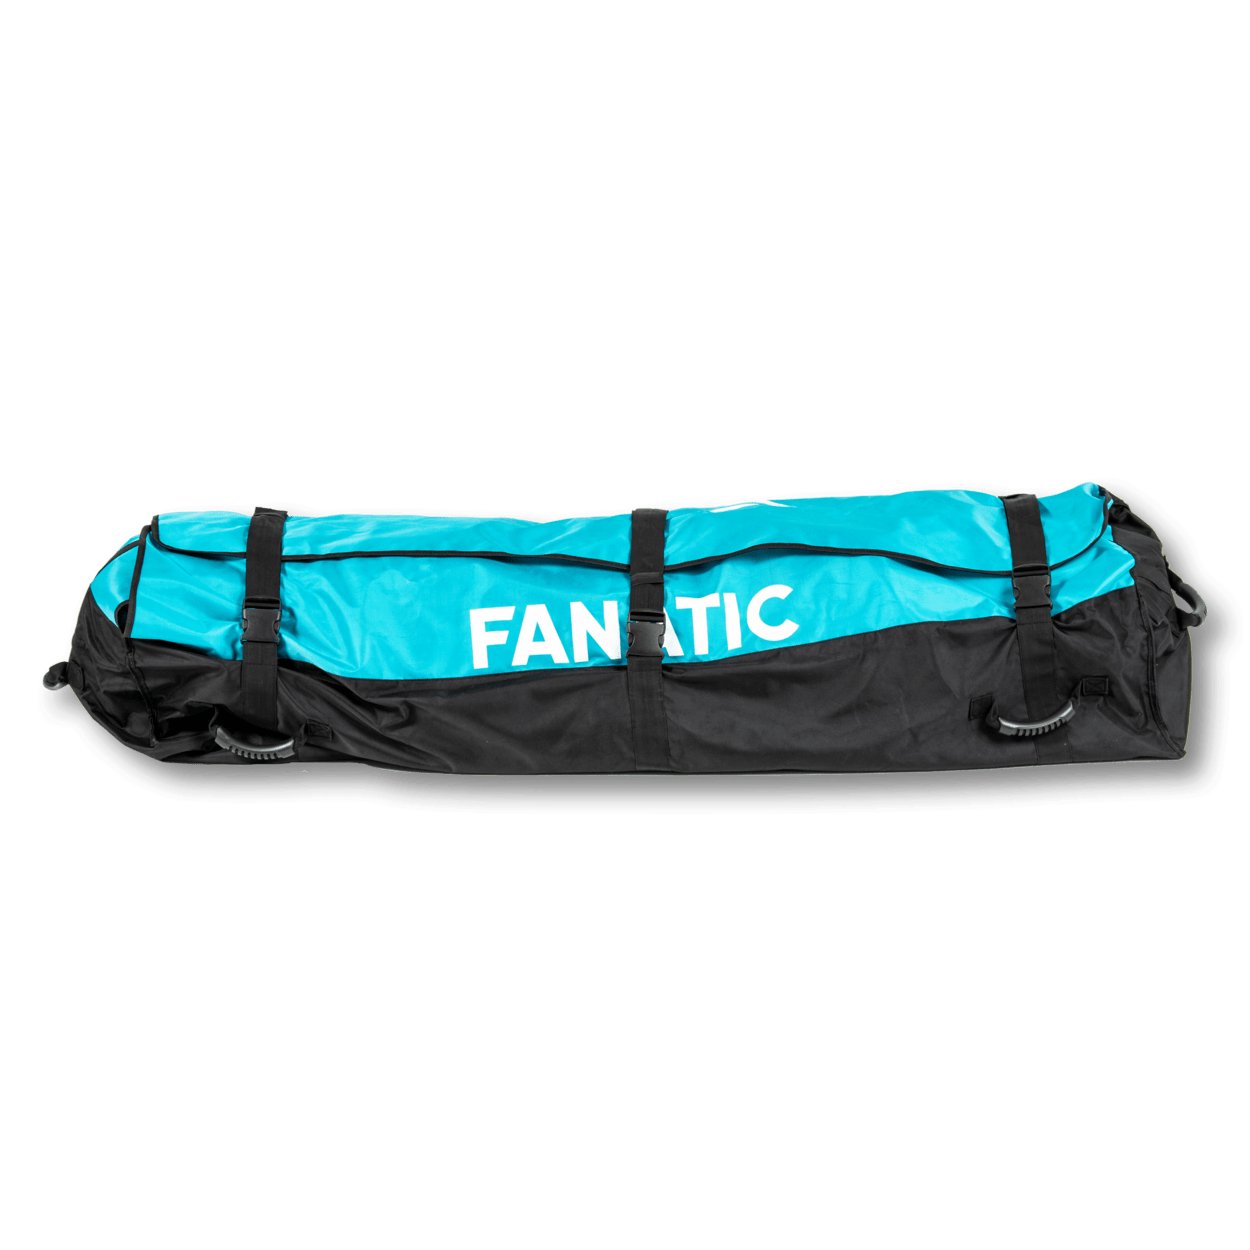 Fanatic Gearbag Fly Air XL 2023 - Worthing Watersports - 9008415928071 - Spareparts - Fanatic SUP